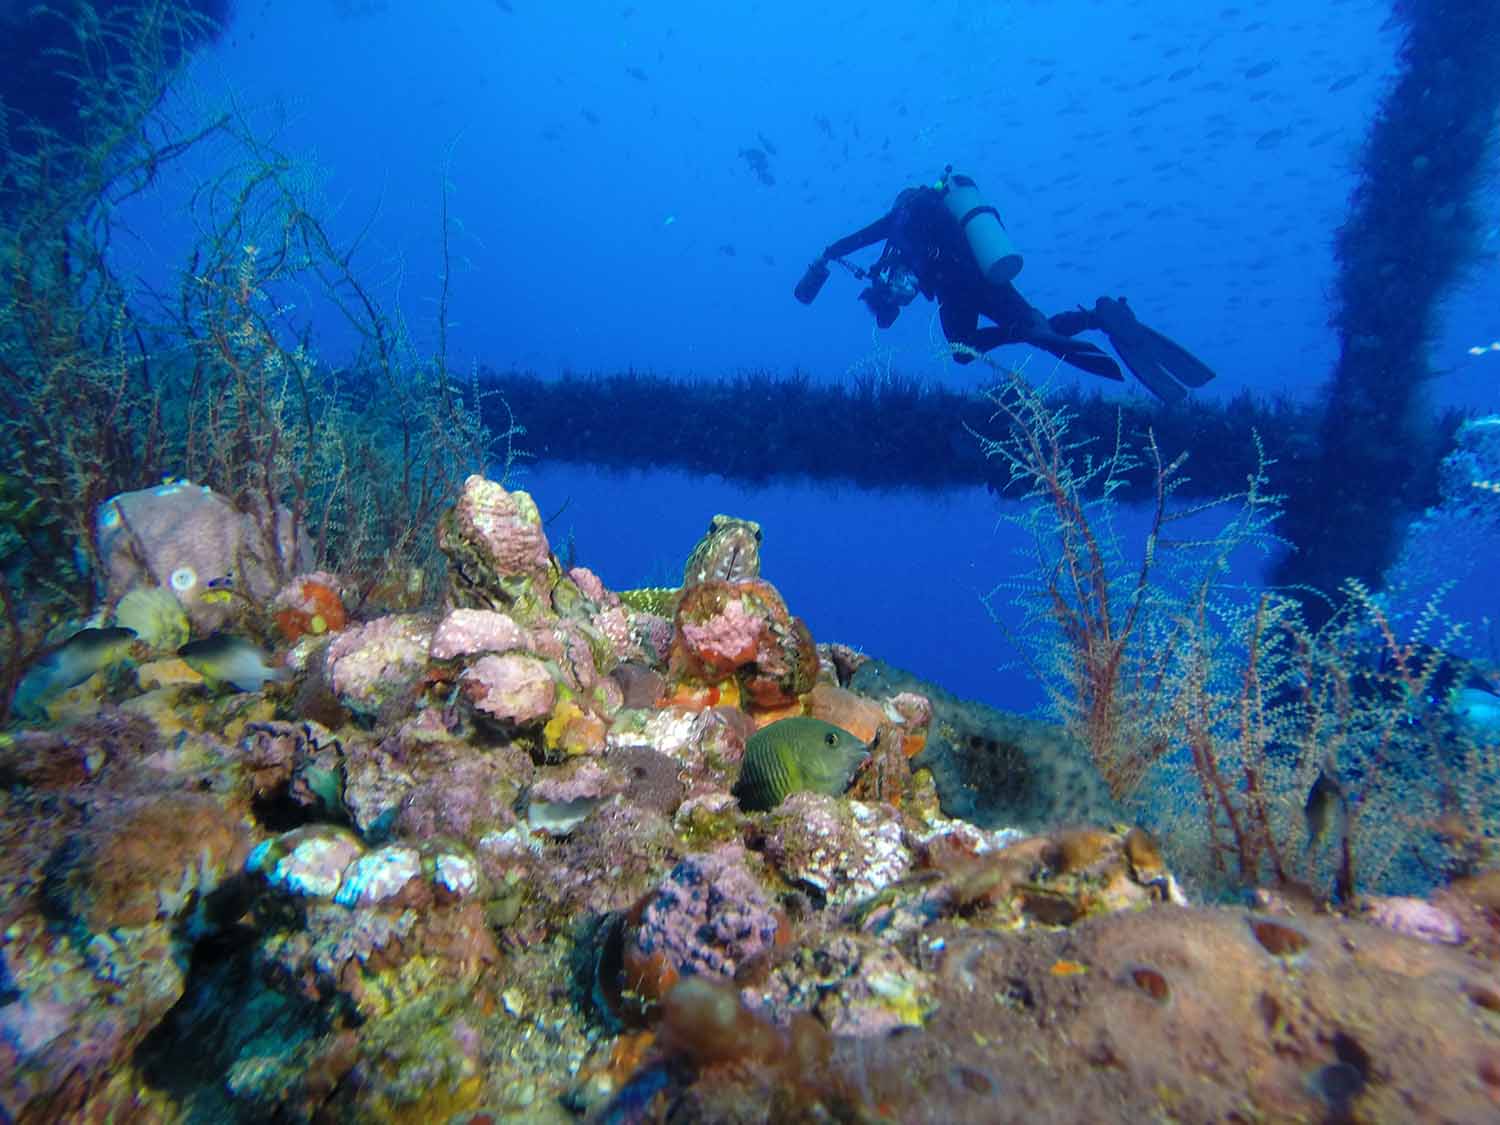 A reef on an oil right with a fish in the center foreground and a diver in the background